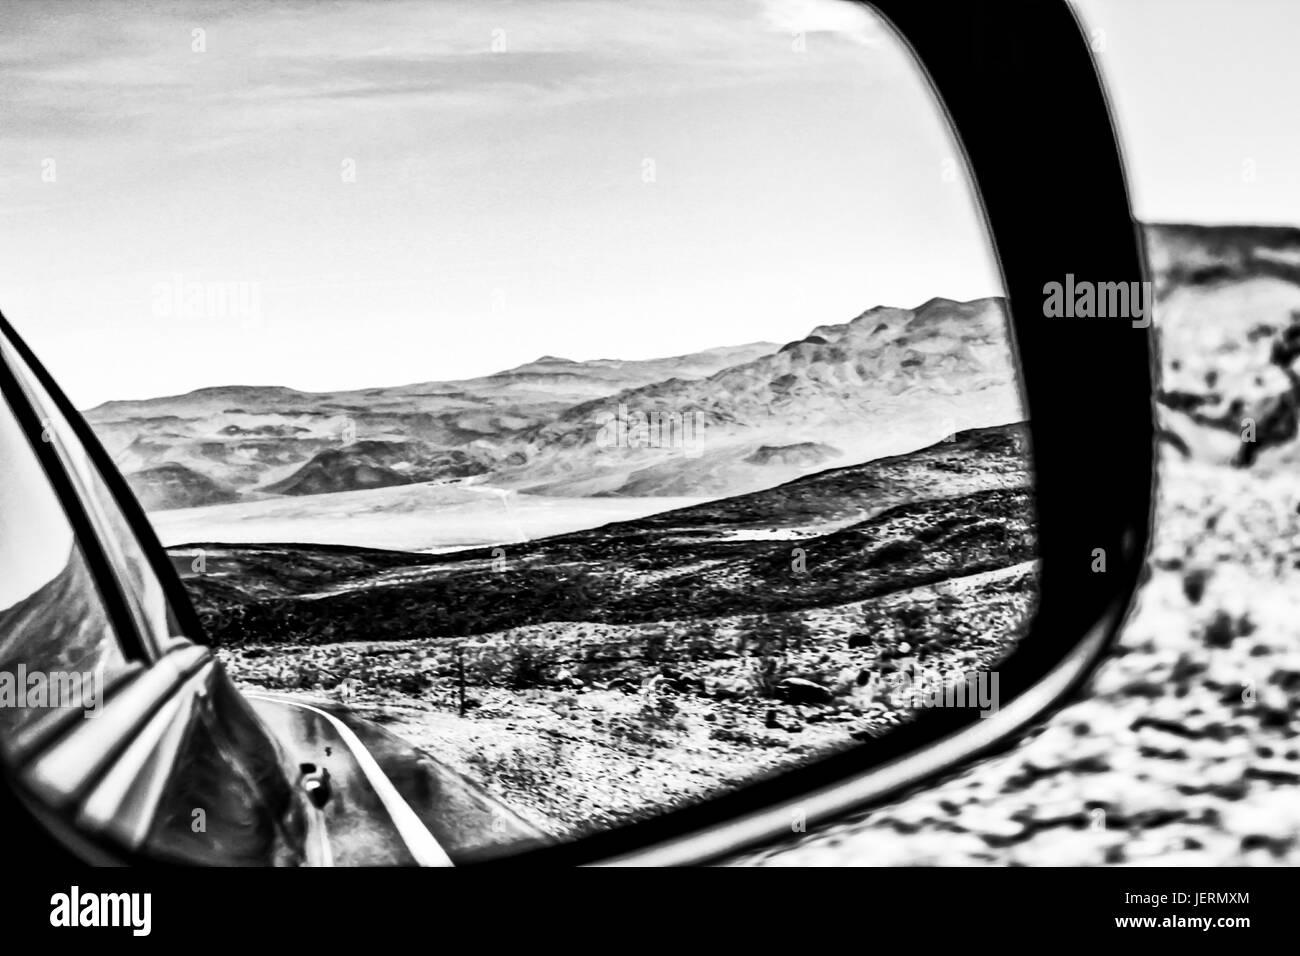 desert view in black and white Stock Photo